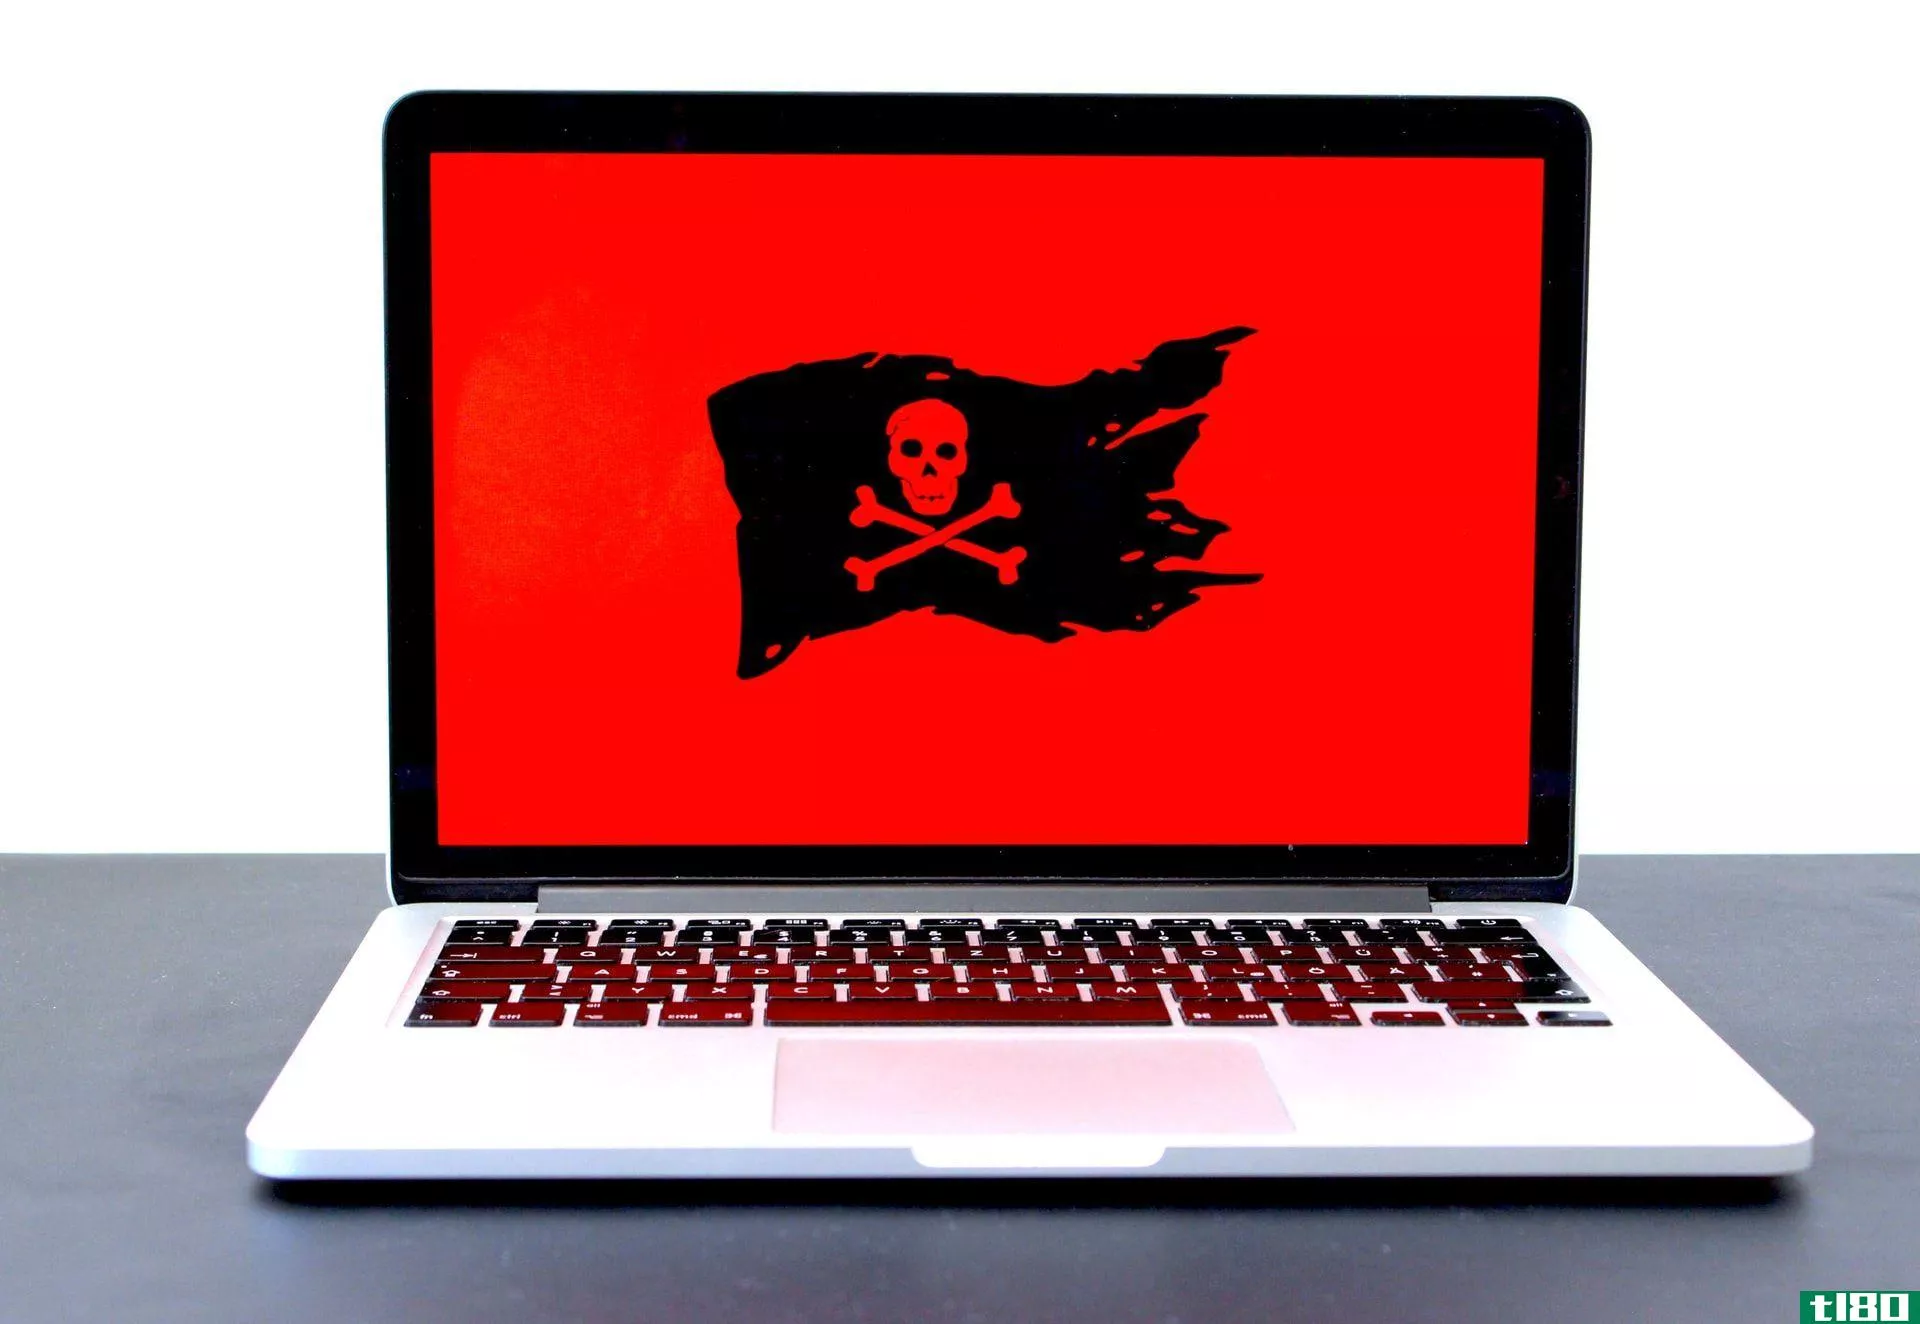 Laptop with a red screen and black pirate flag